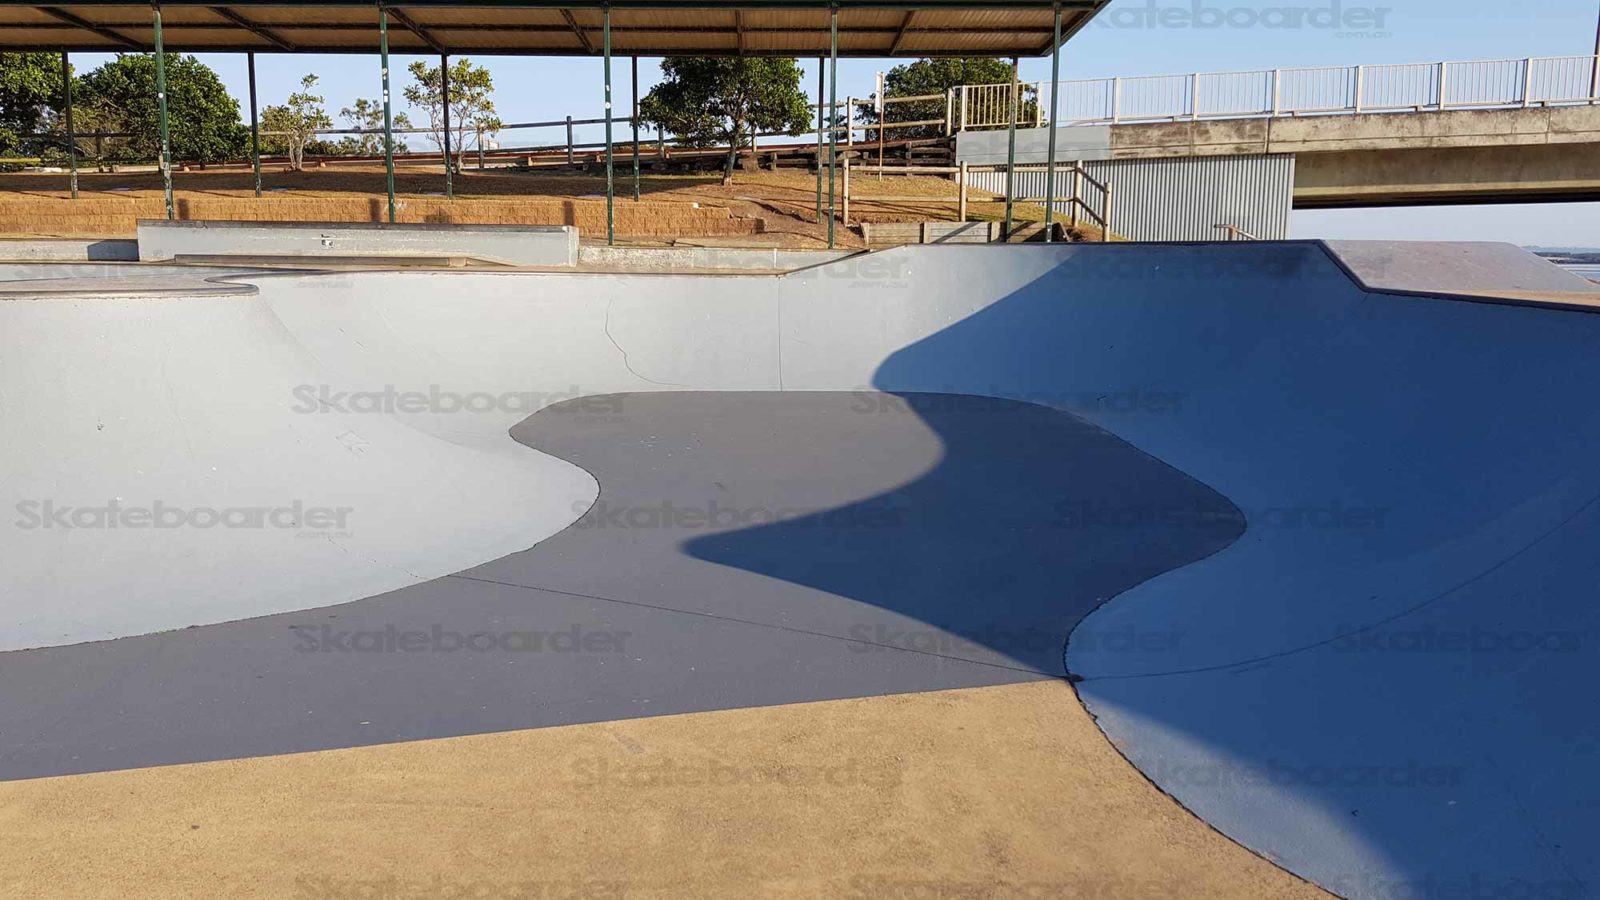 Ballina Skate Bowl with extension